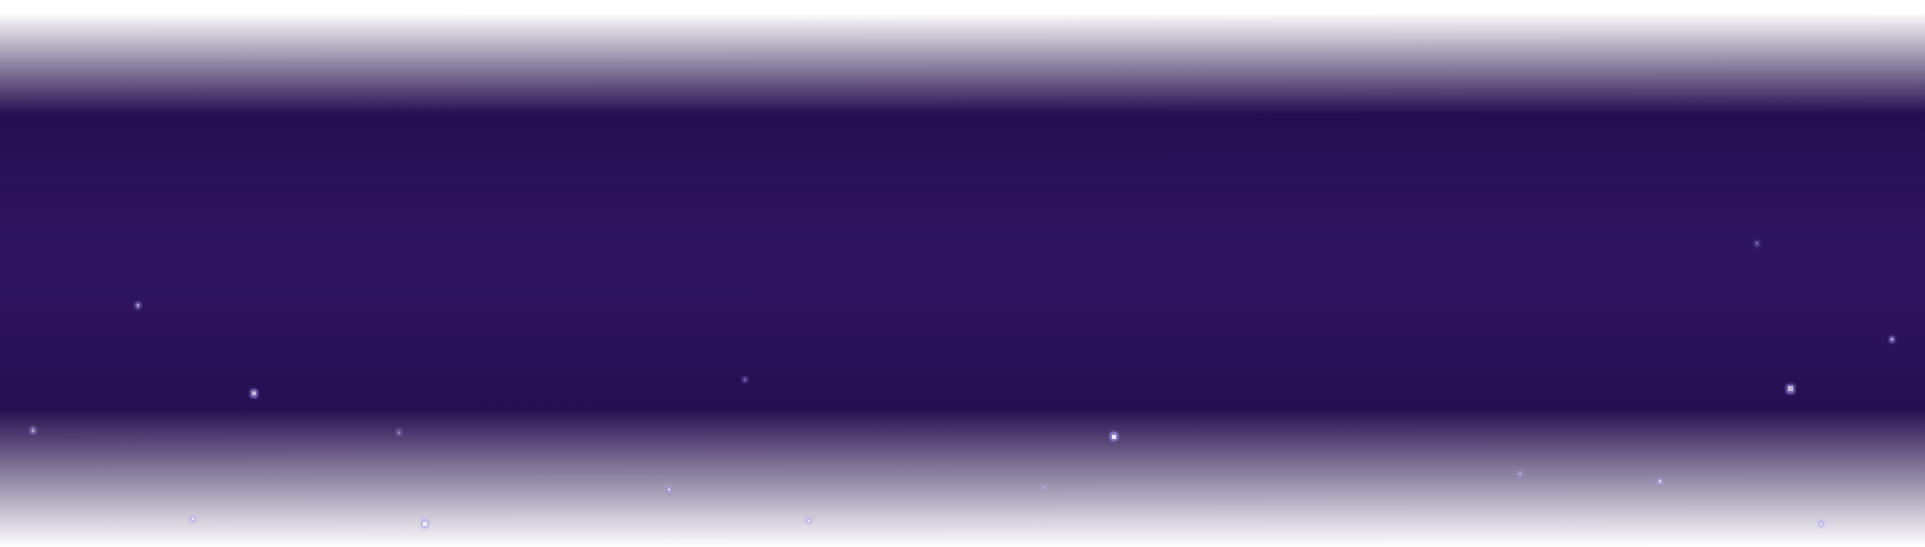 Background With Stars